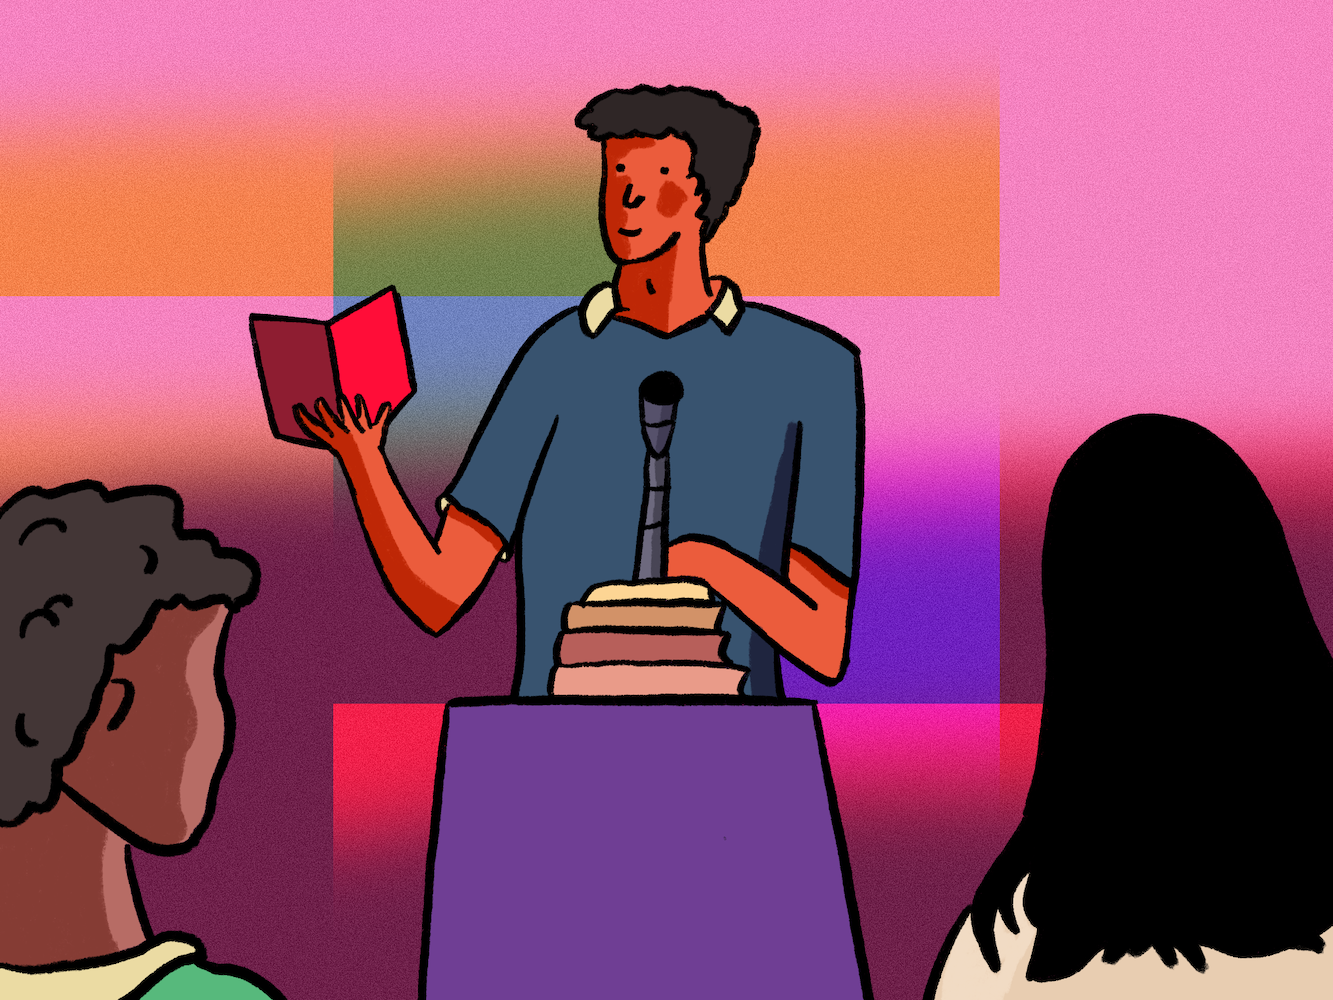 An illustration of a person standing behind a podium and reading a book to two other people.